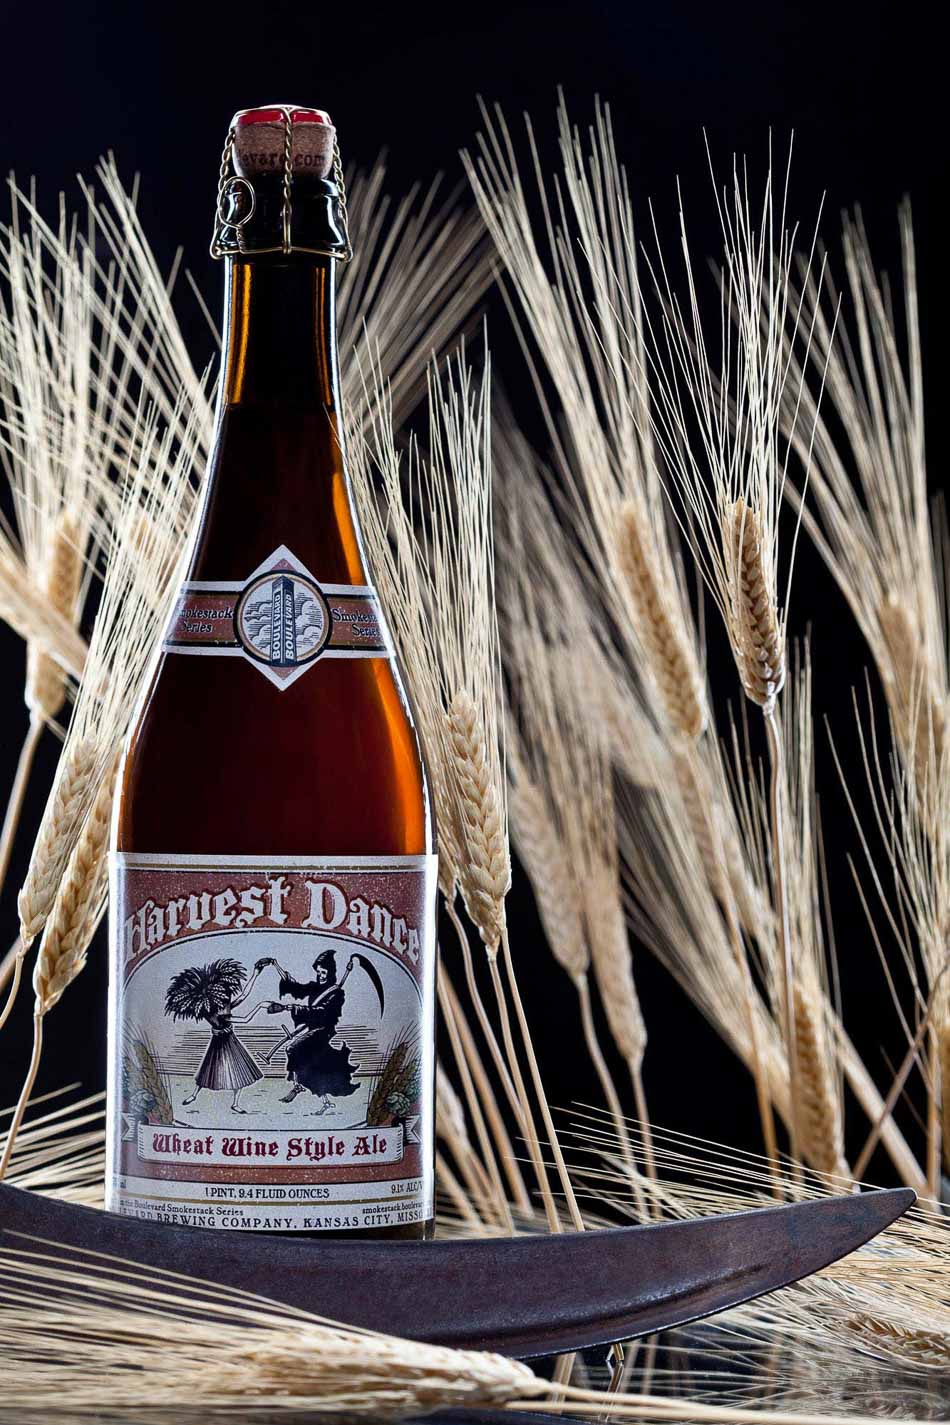 Still life of Boulevard Beer - Harvest Dance | Wheat and Sickle | Dramatic product photography | Bottle Photography | Shot in Denver Colorado